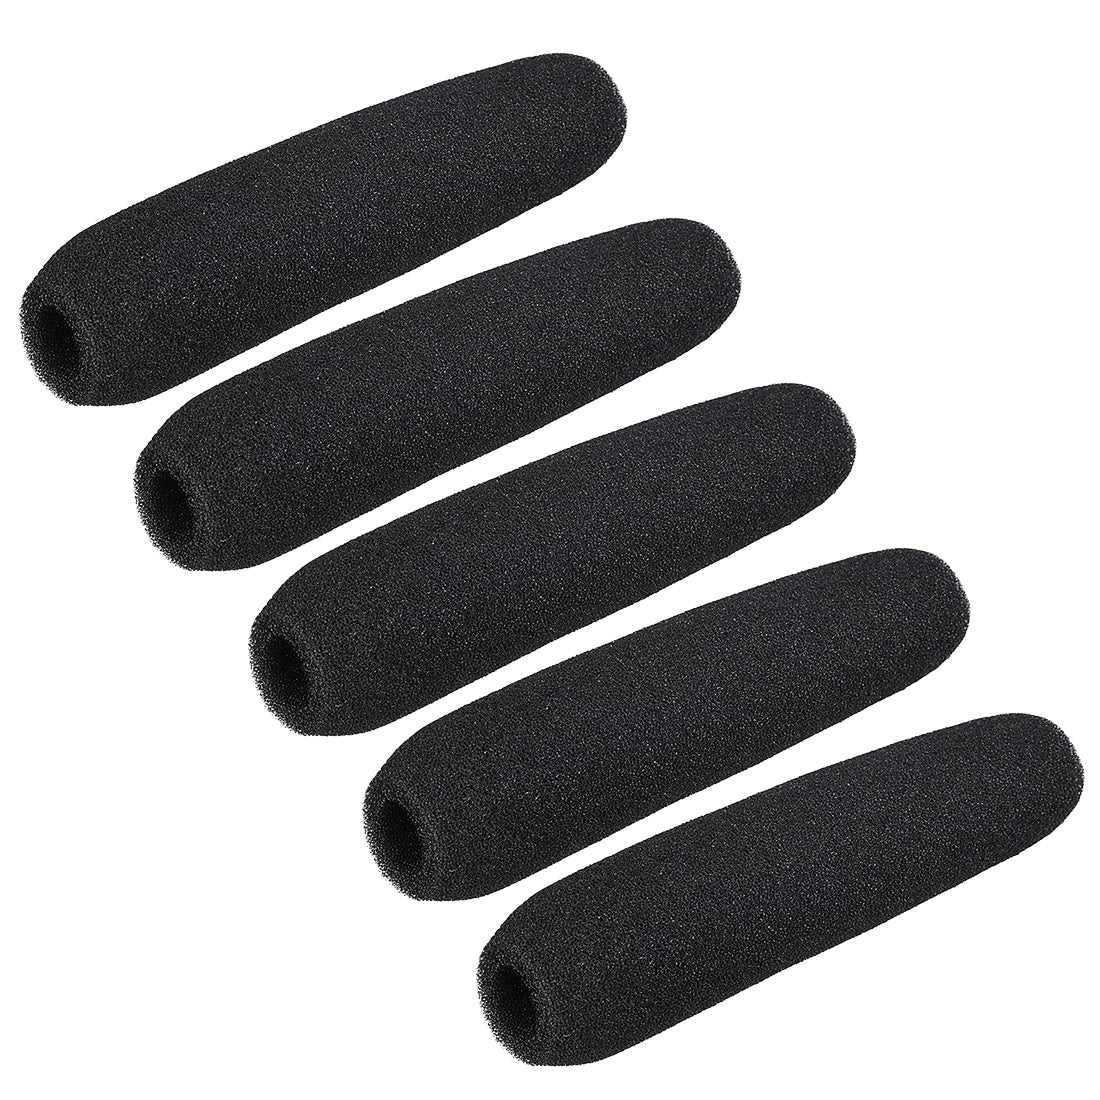 uxcell Uxcell 5PCS Sponge Foam Mic Cover Conference Microphone Windscreen Shield Protection Black 120mm Long